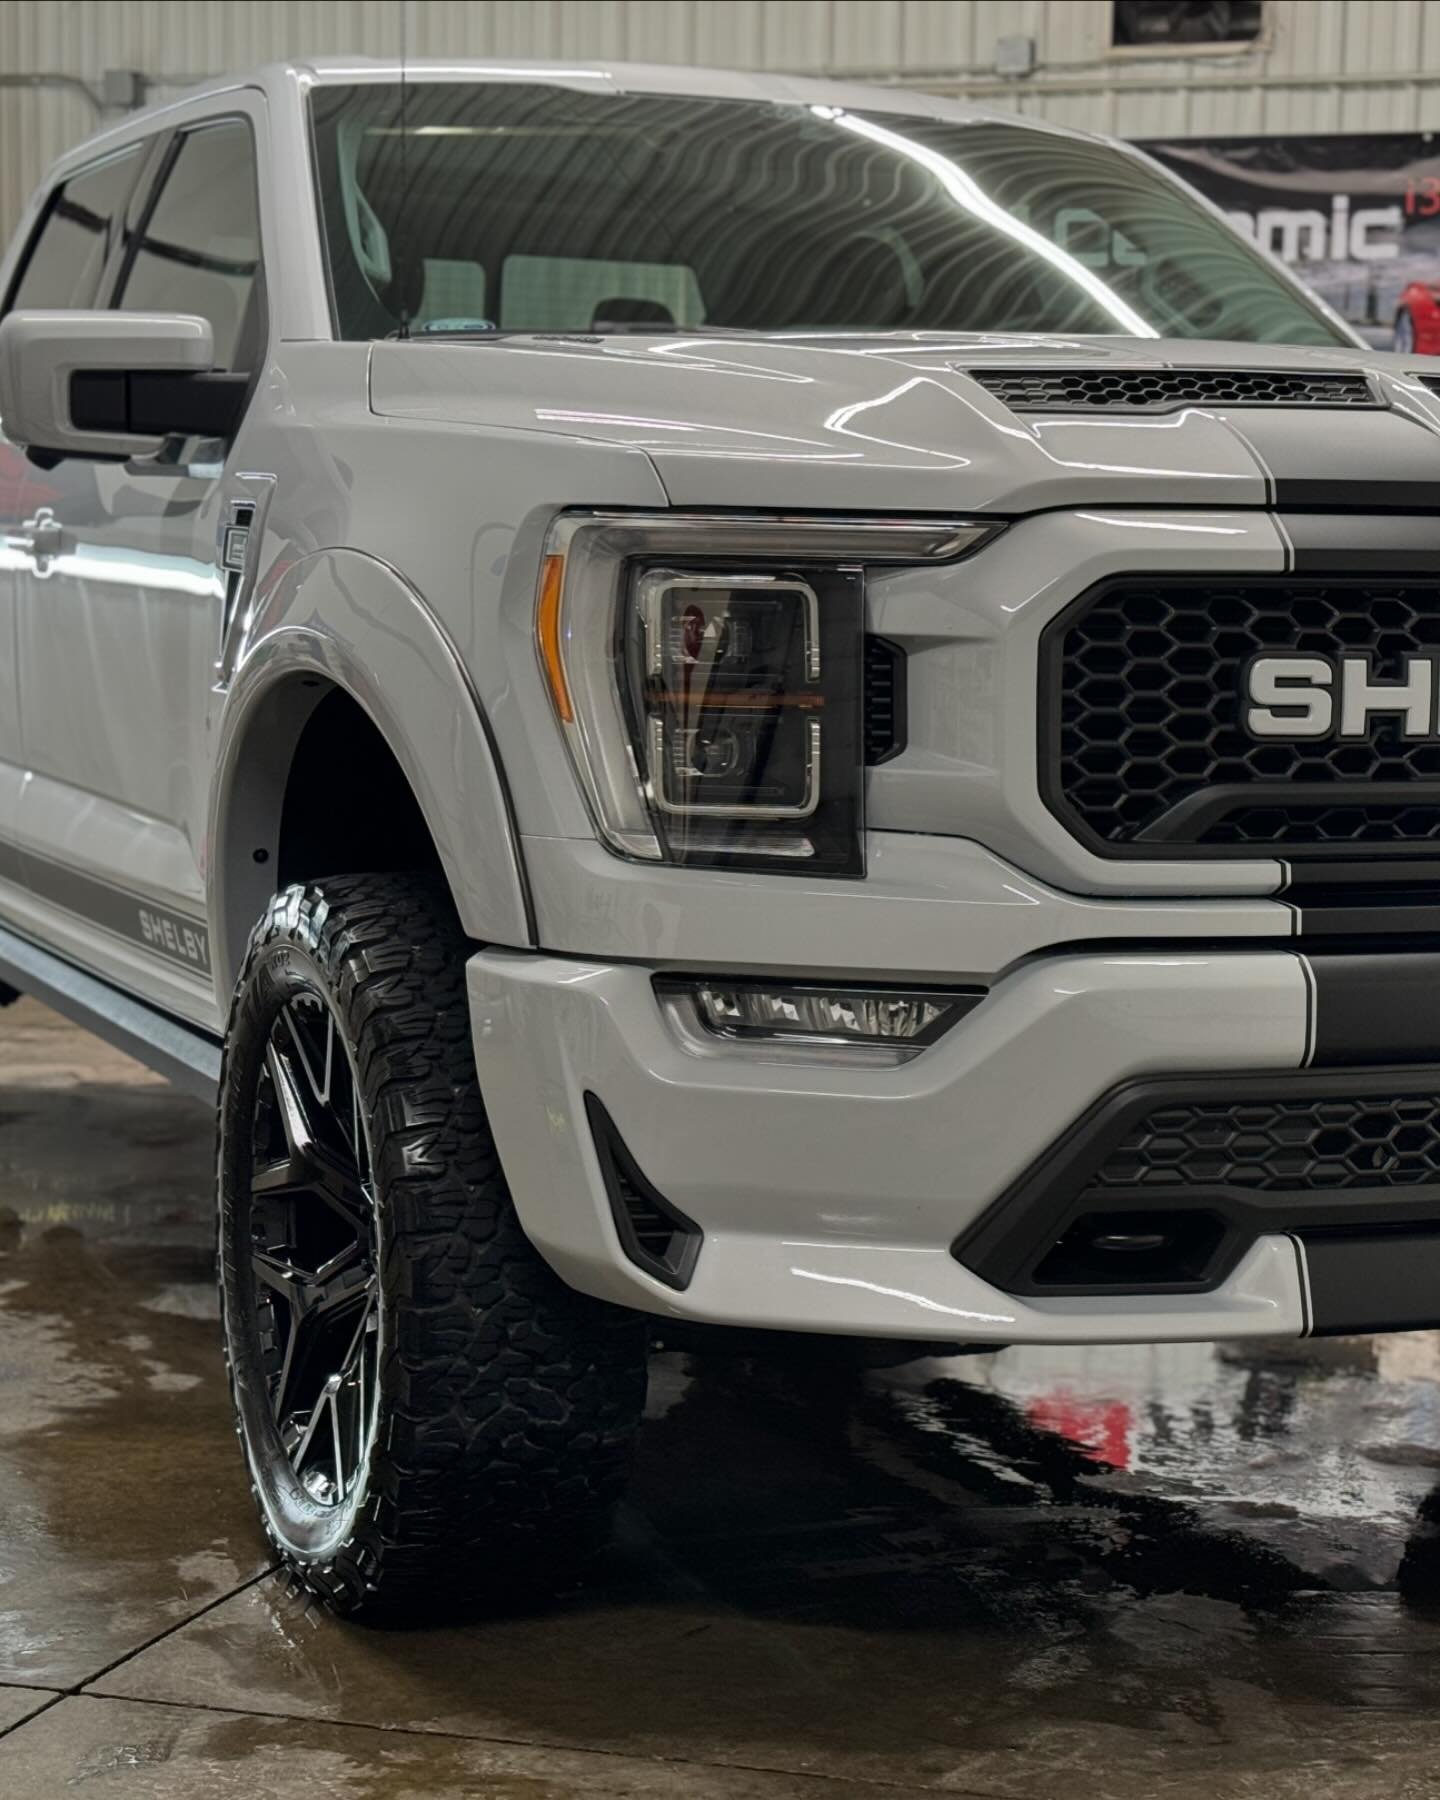 This Shelby F-150 is ready for the off-road.. The 775HP supercharged V8 monster in for a full detail, full front PPF, and 2 front windows 50% ceramic.